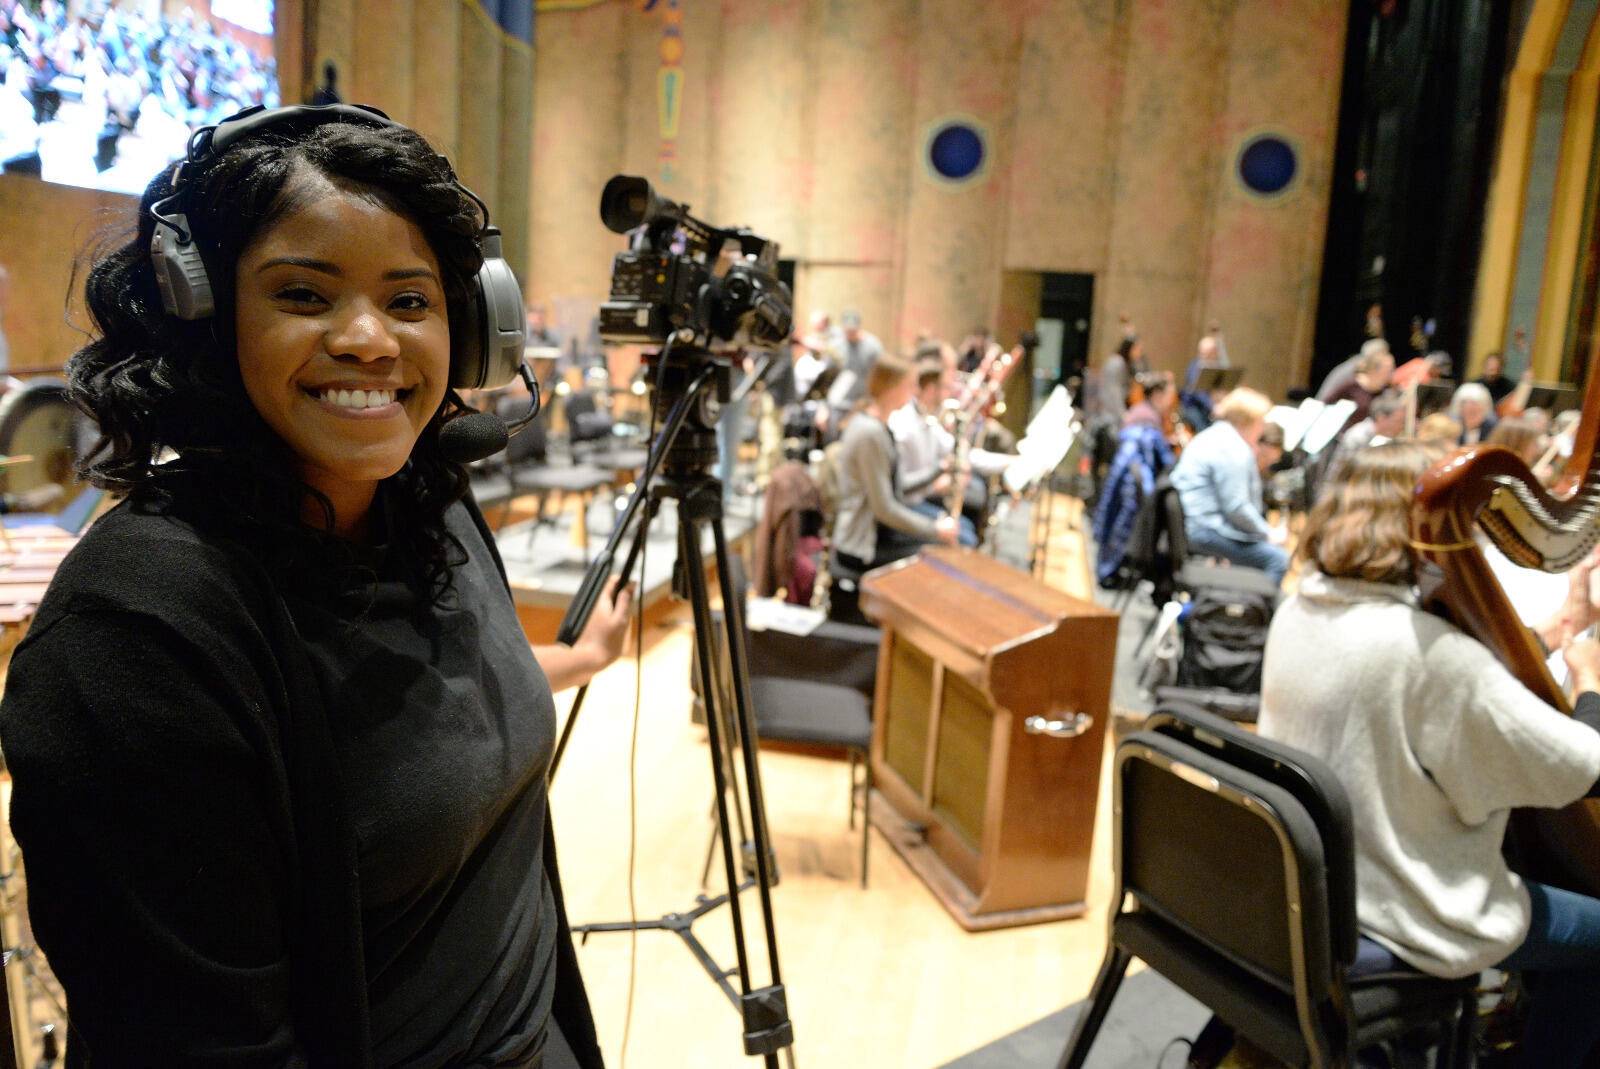 Erica Mokun, a junior broadcast journalism major, takes a break from operating a video camera during a rehearsal of the Richmond Symphony.